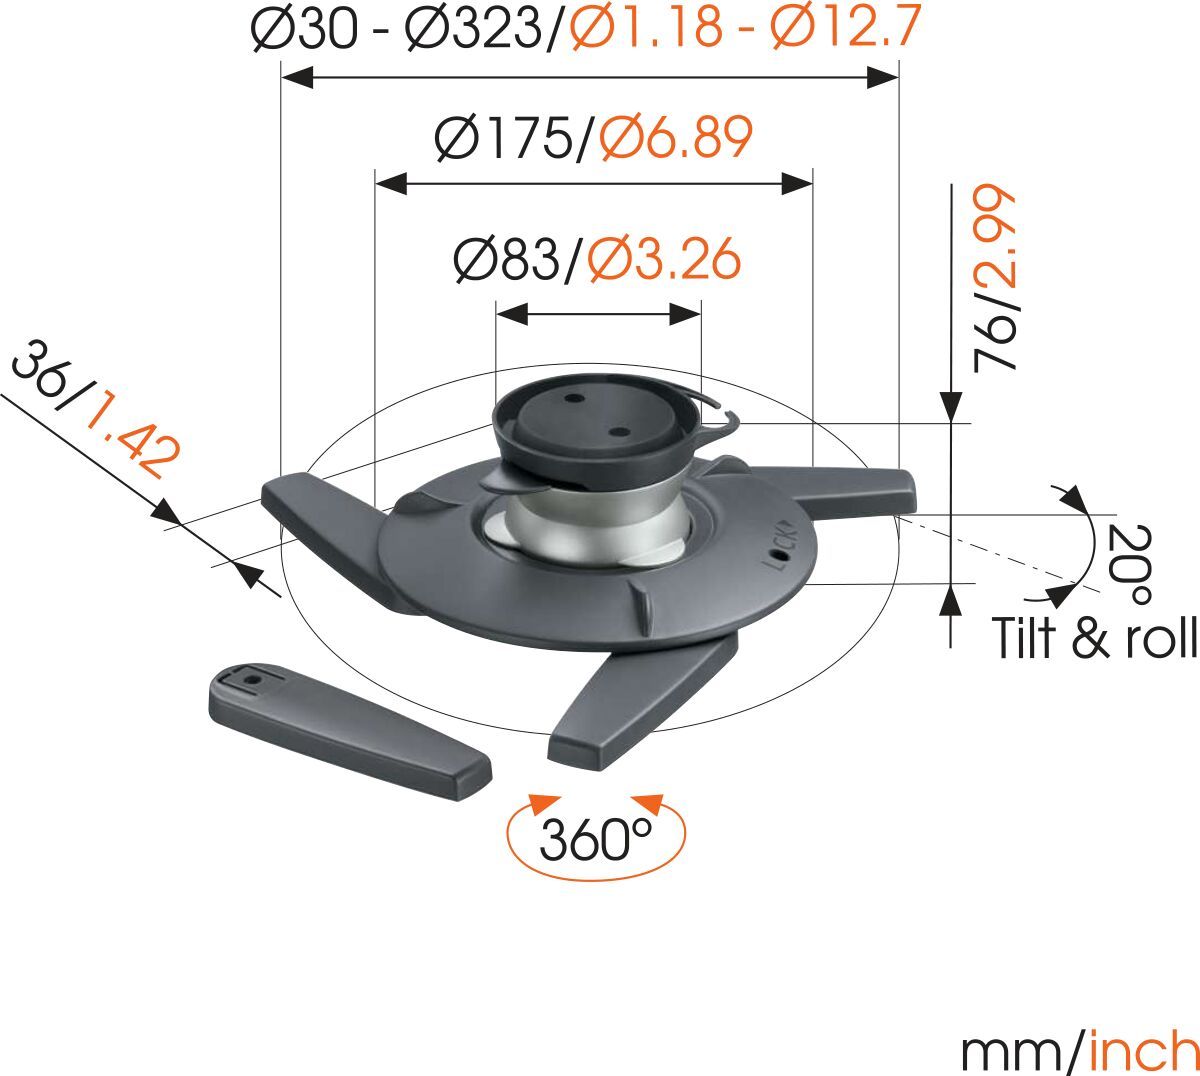 Vogel's EPC 6545 Projector Ceiling Mount - Max. weight load: Dimensions